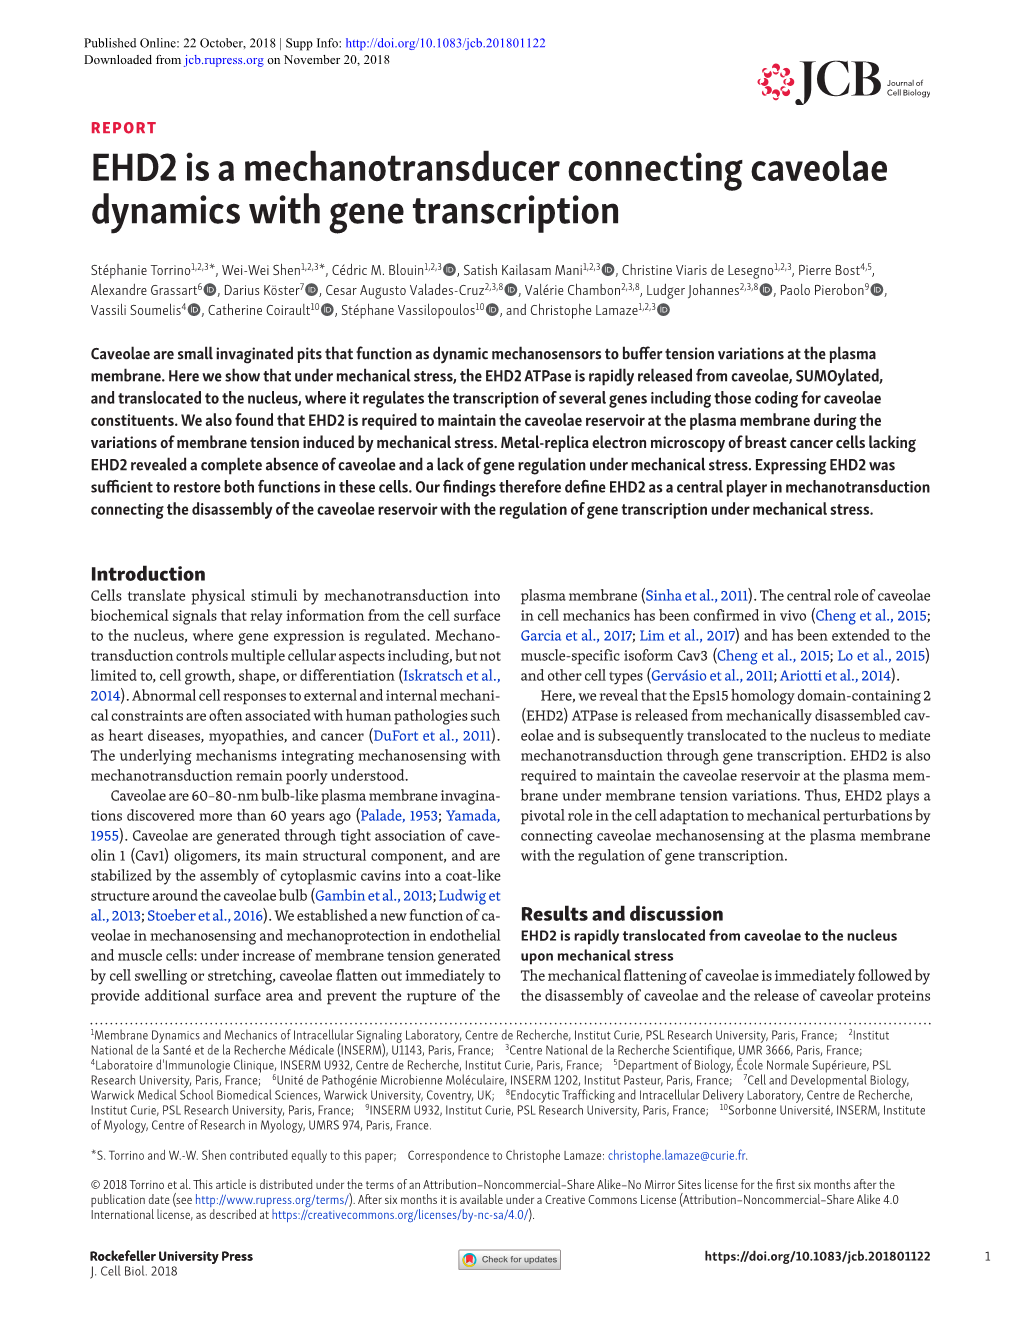 EHD2 Is a Mechanotransducer Connecting Caveolae Dynamics with Gene Transcription